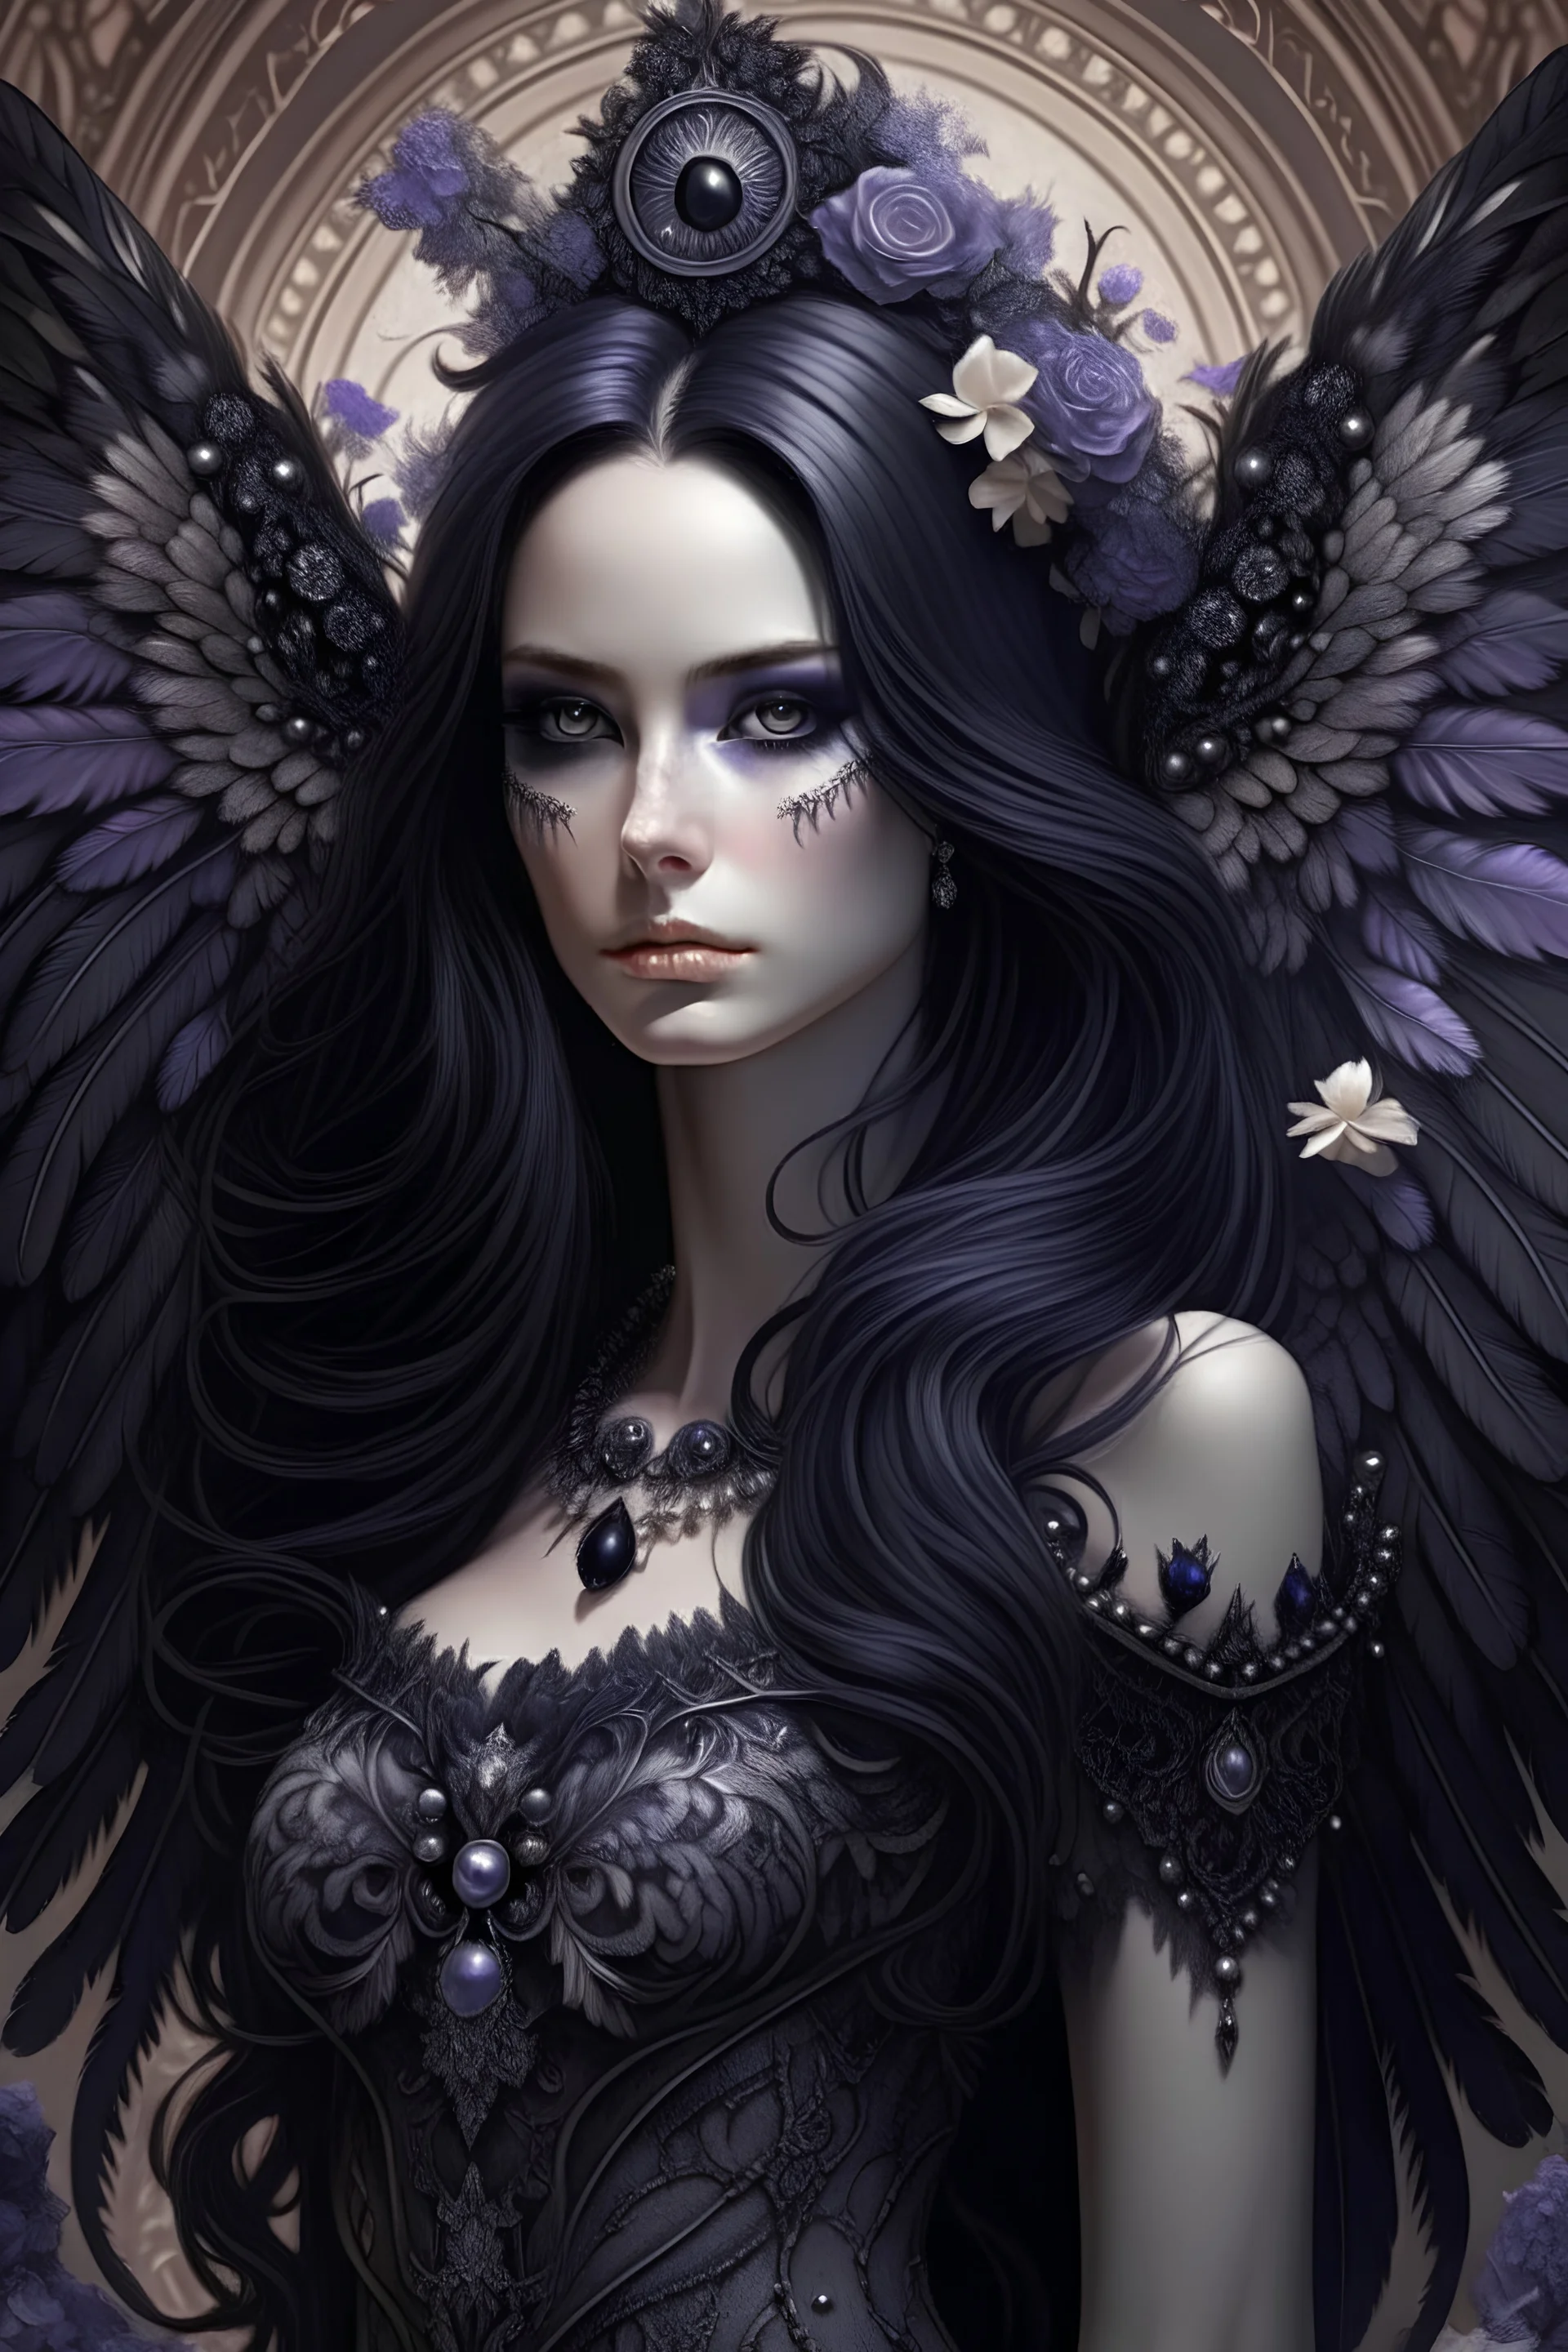 Beautiful Seraphim black angel portrait textured feathers ribbed with black pearls i, white crystals n the long black hair, textured butterfly pattern embossed art nouveau black and violet costume extremelmly detailed intricate 8 k organic bio spinal ribbed detail of floral embossed art nouveau background resolution epic cinematic maximálist concept art